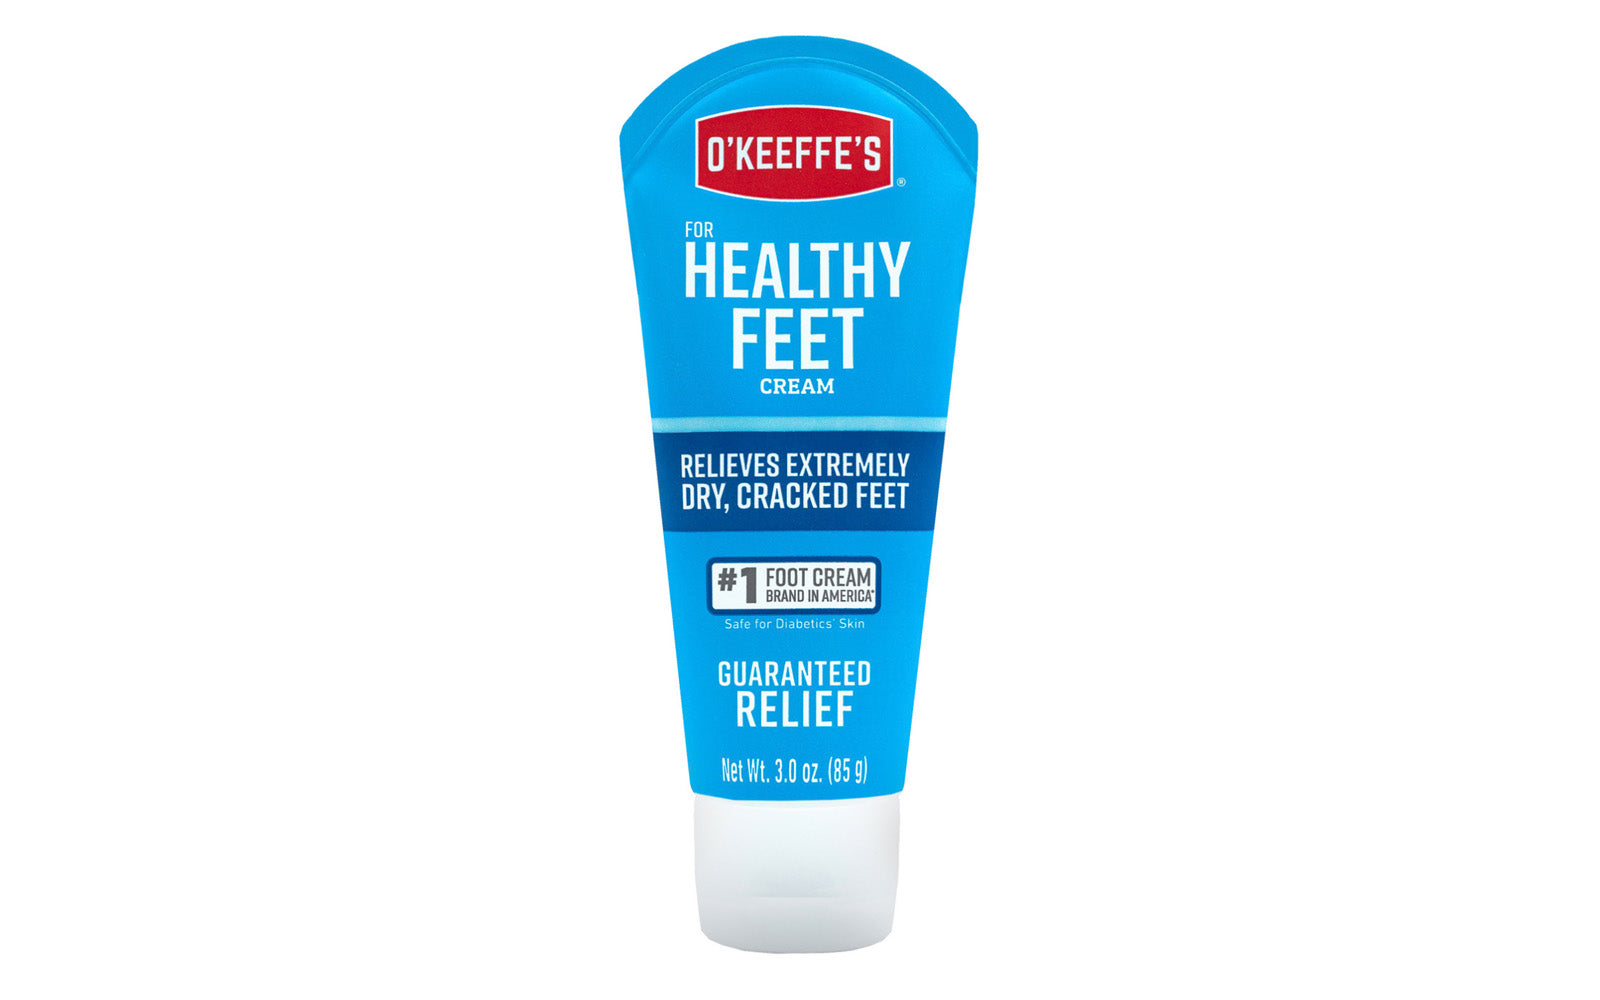 O'Keeffe's Healthy Feet 3 oz tube hand cream. Concentrated, highly effective moisturizer. Relieves extremely dry hands that crack & split. Ideal for dry skin, skin repair, cracked skin, skin relief, and skin care. Creates a moisture barrier that seals moisture in the skin. Odorless. Helps cracked feet. 722510028007